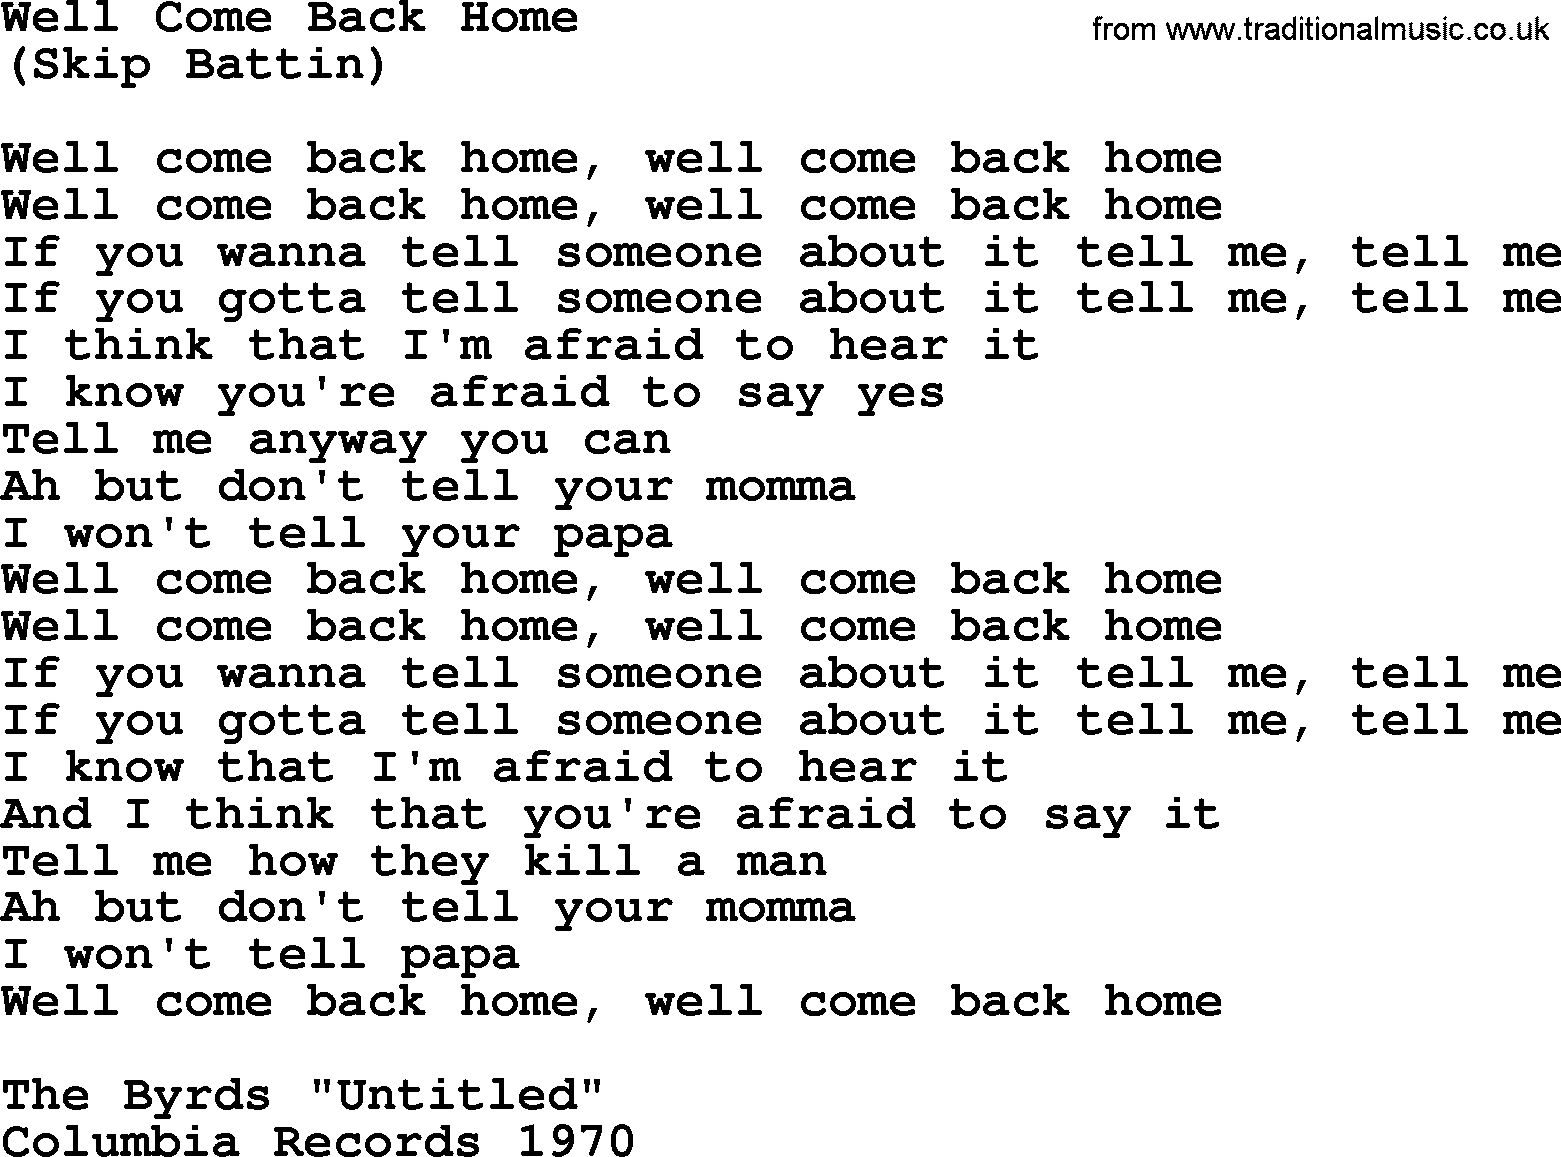 The Byrds song Well Come Back Home, lyrics